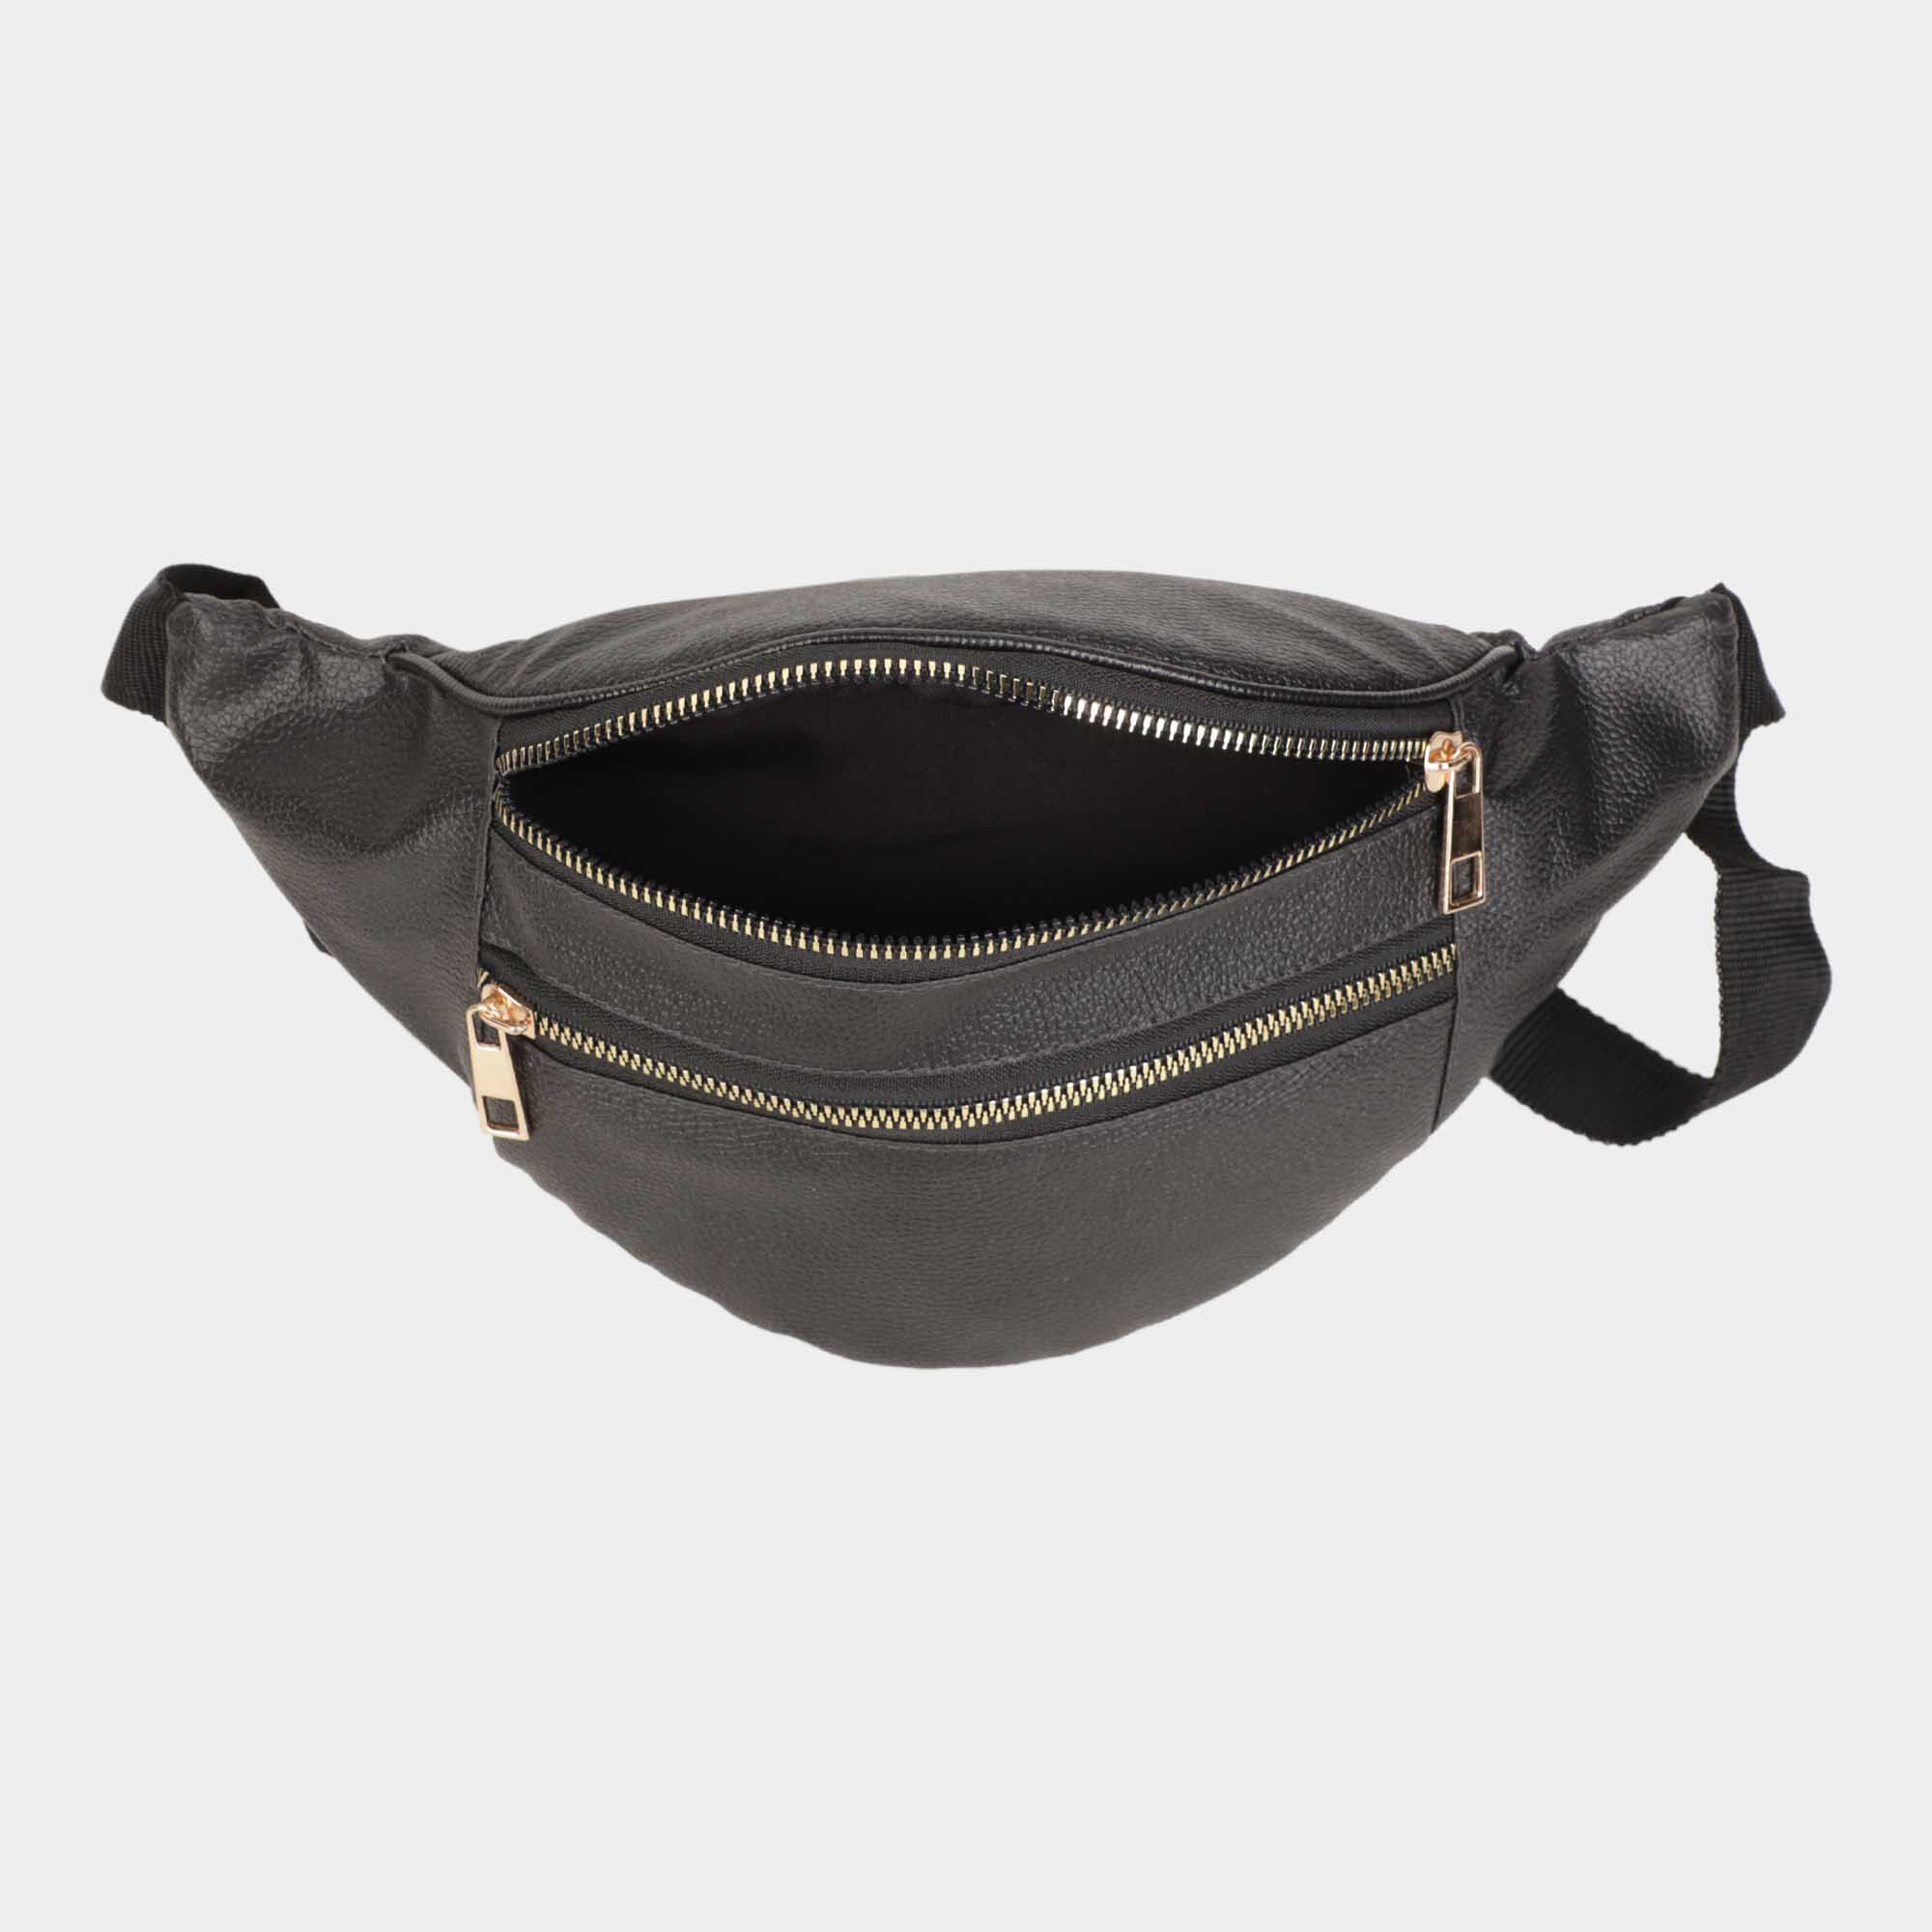 Looking for Leather Waist Bags? The Chesterfield Brand - The Chesterfield  Brand